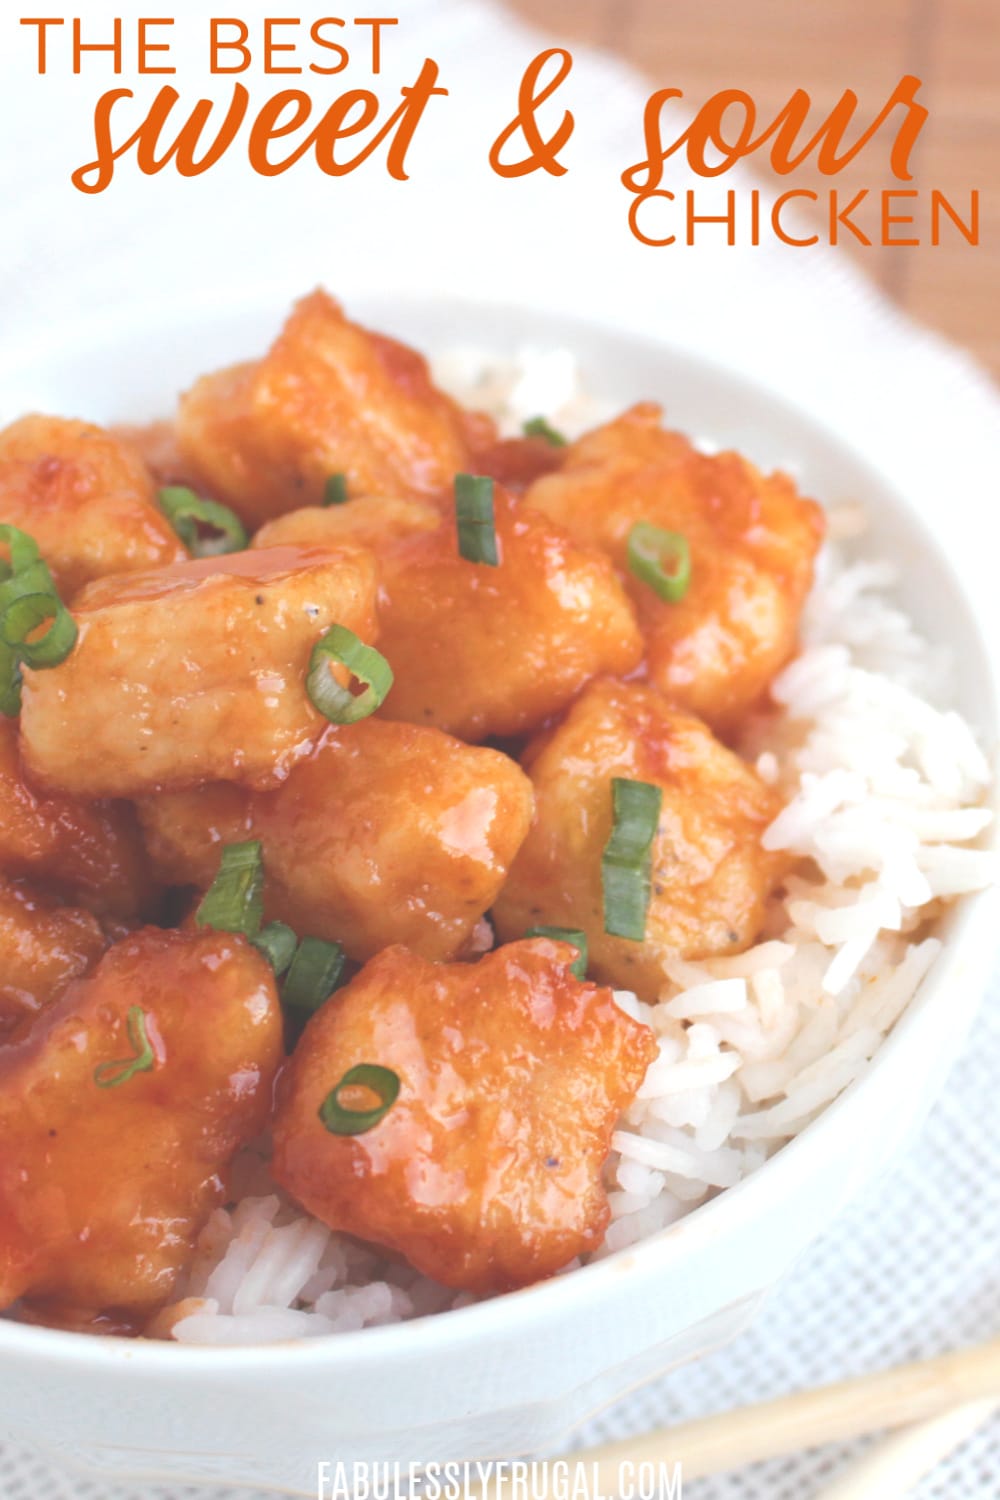 Baked sweet and sour chicken recipe